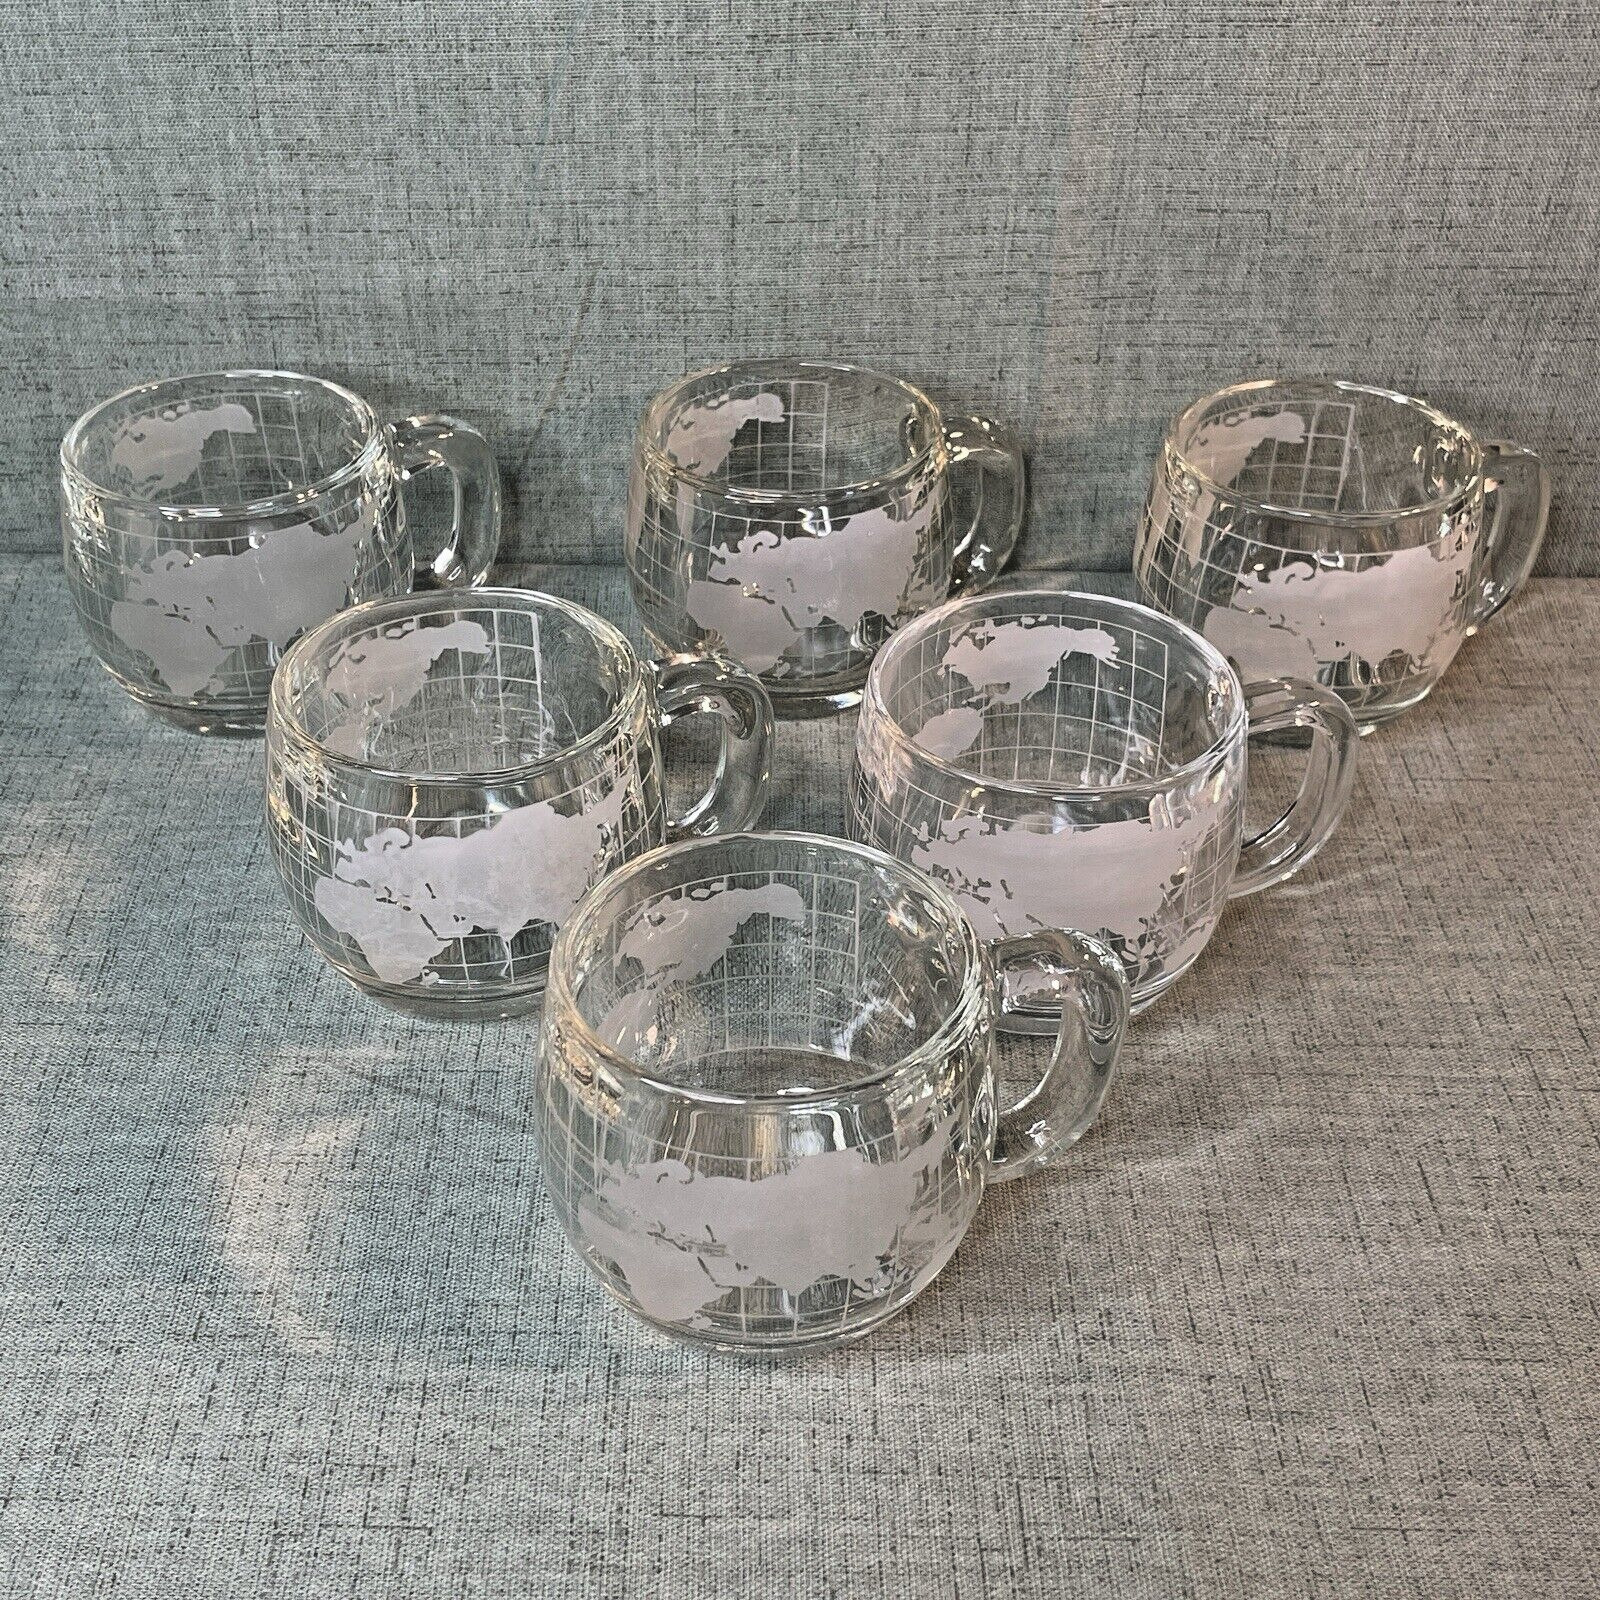 Nestle Nescafe World Globe Coffee Mugs Cups Clear Glass White Etched Set of 6